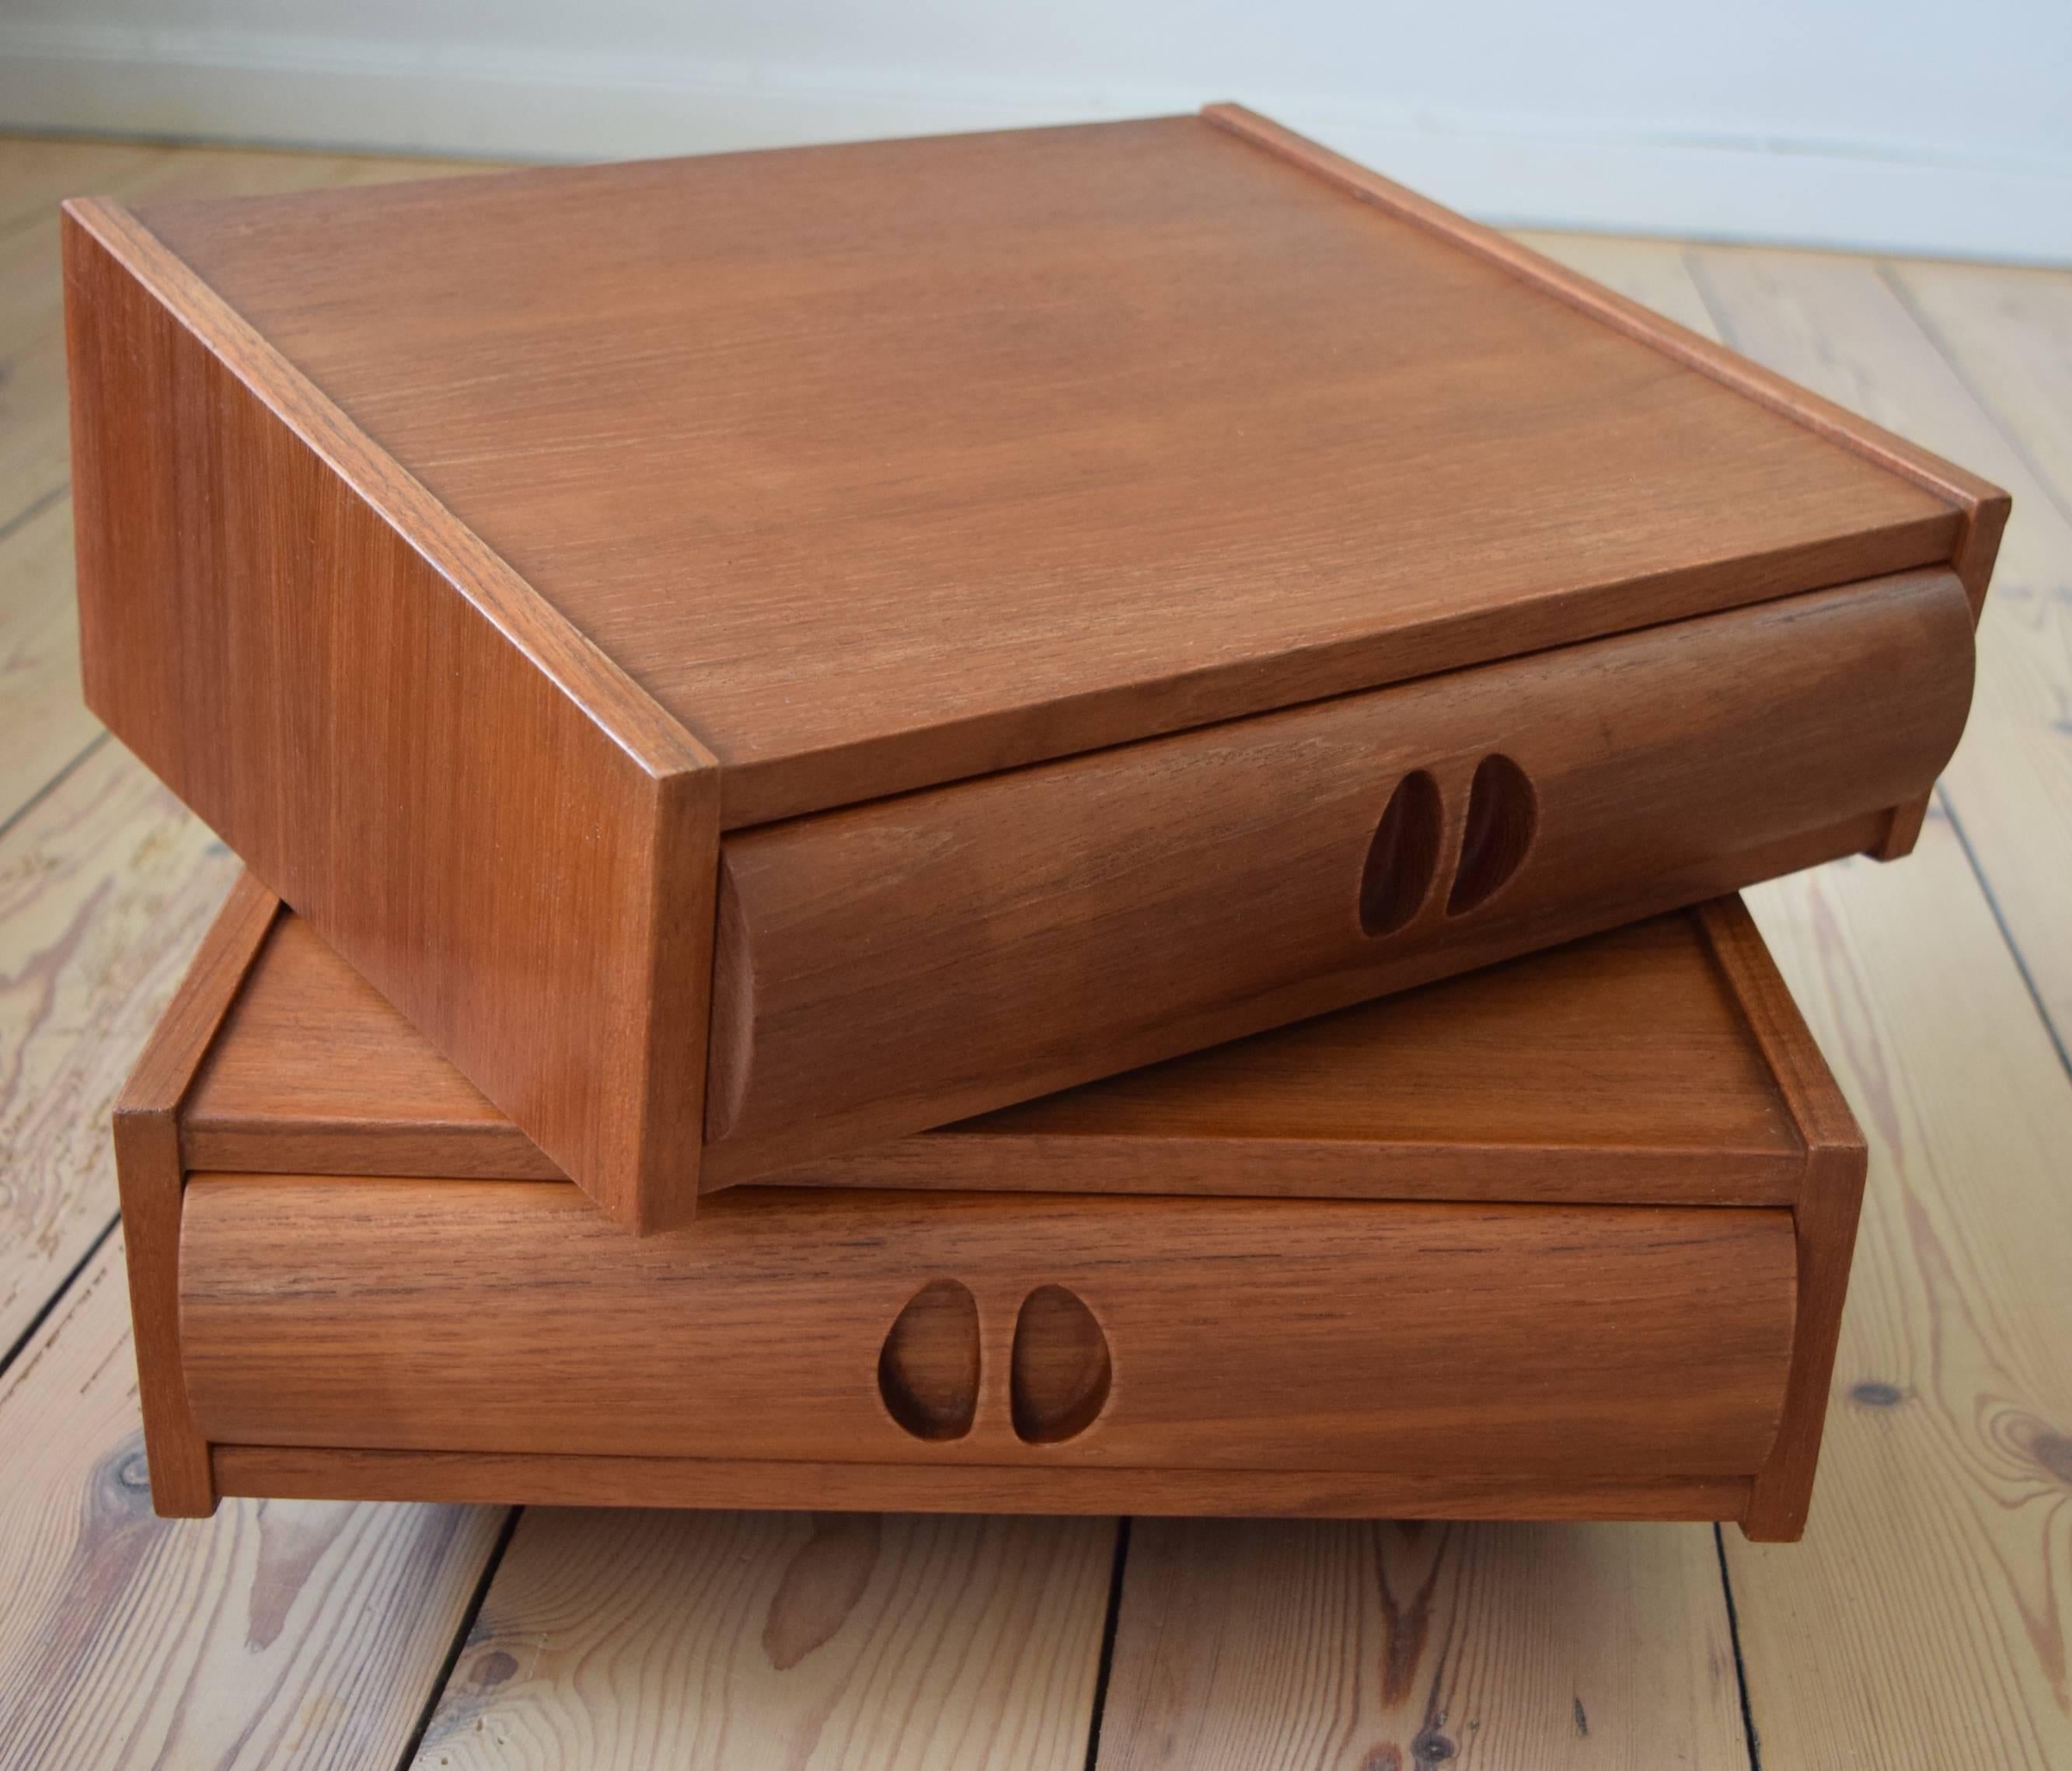 Two teak night tables manufactured in Denmark in the 1960s. This lovely pair can be attached to a wall or headboard using screws and/or dowels. Features a curved piece of solid teak on the front of the drawer with recessed drawer pulls.